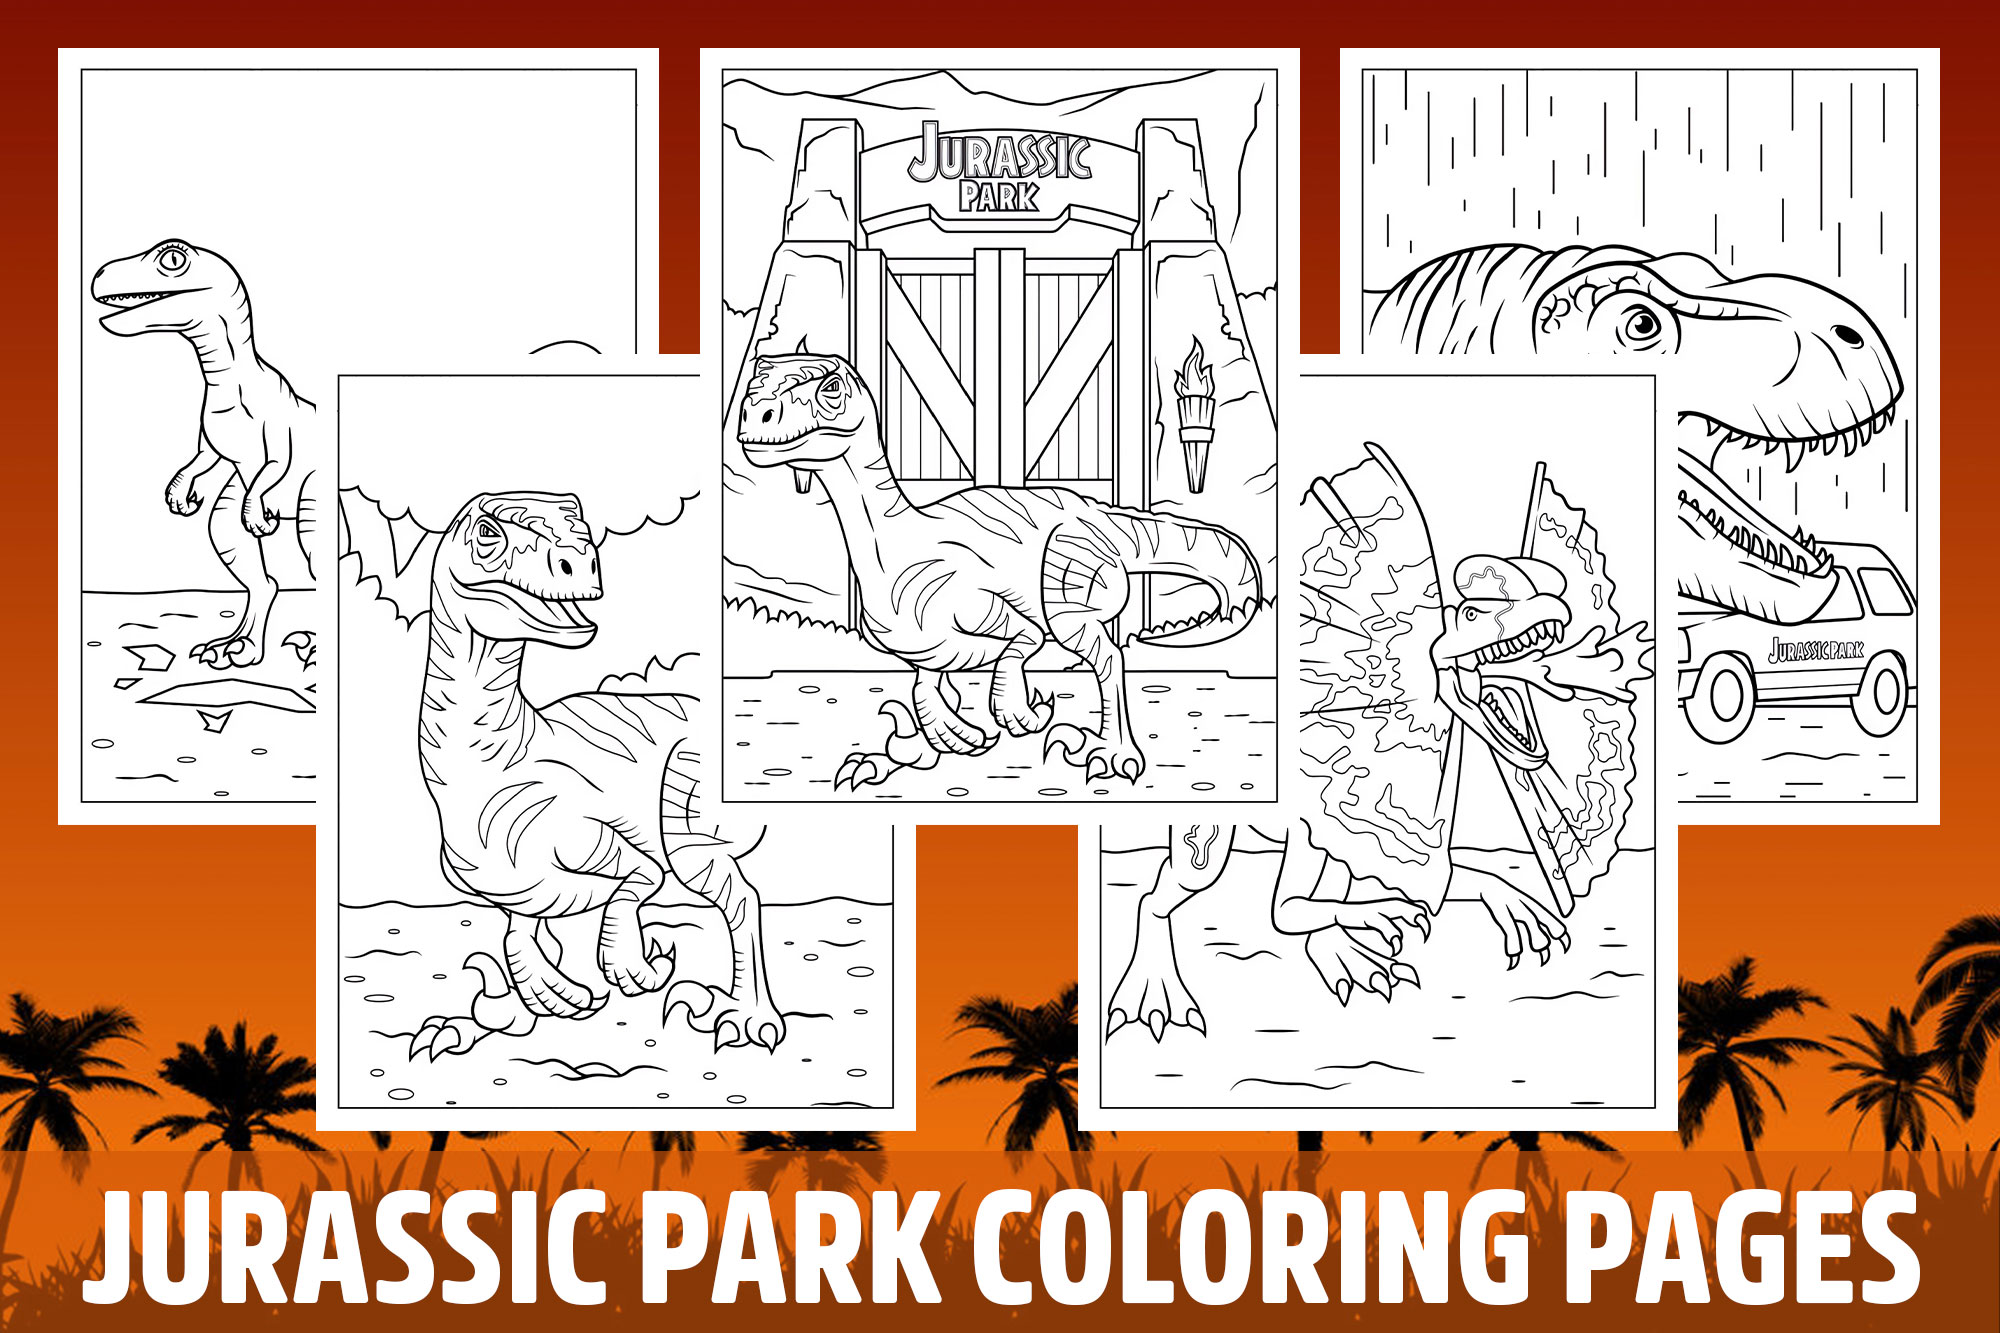 Jurassic park coloring pages for kids girls boys teens birthday school activity made by teachers